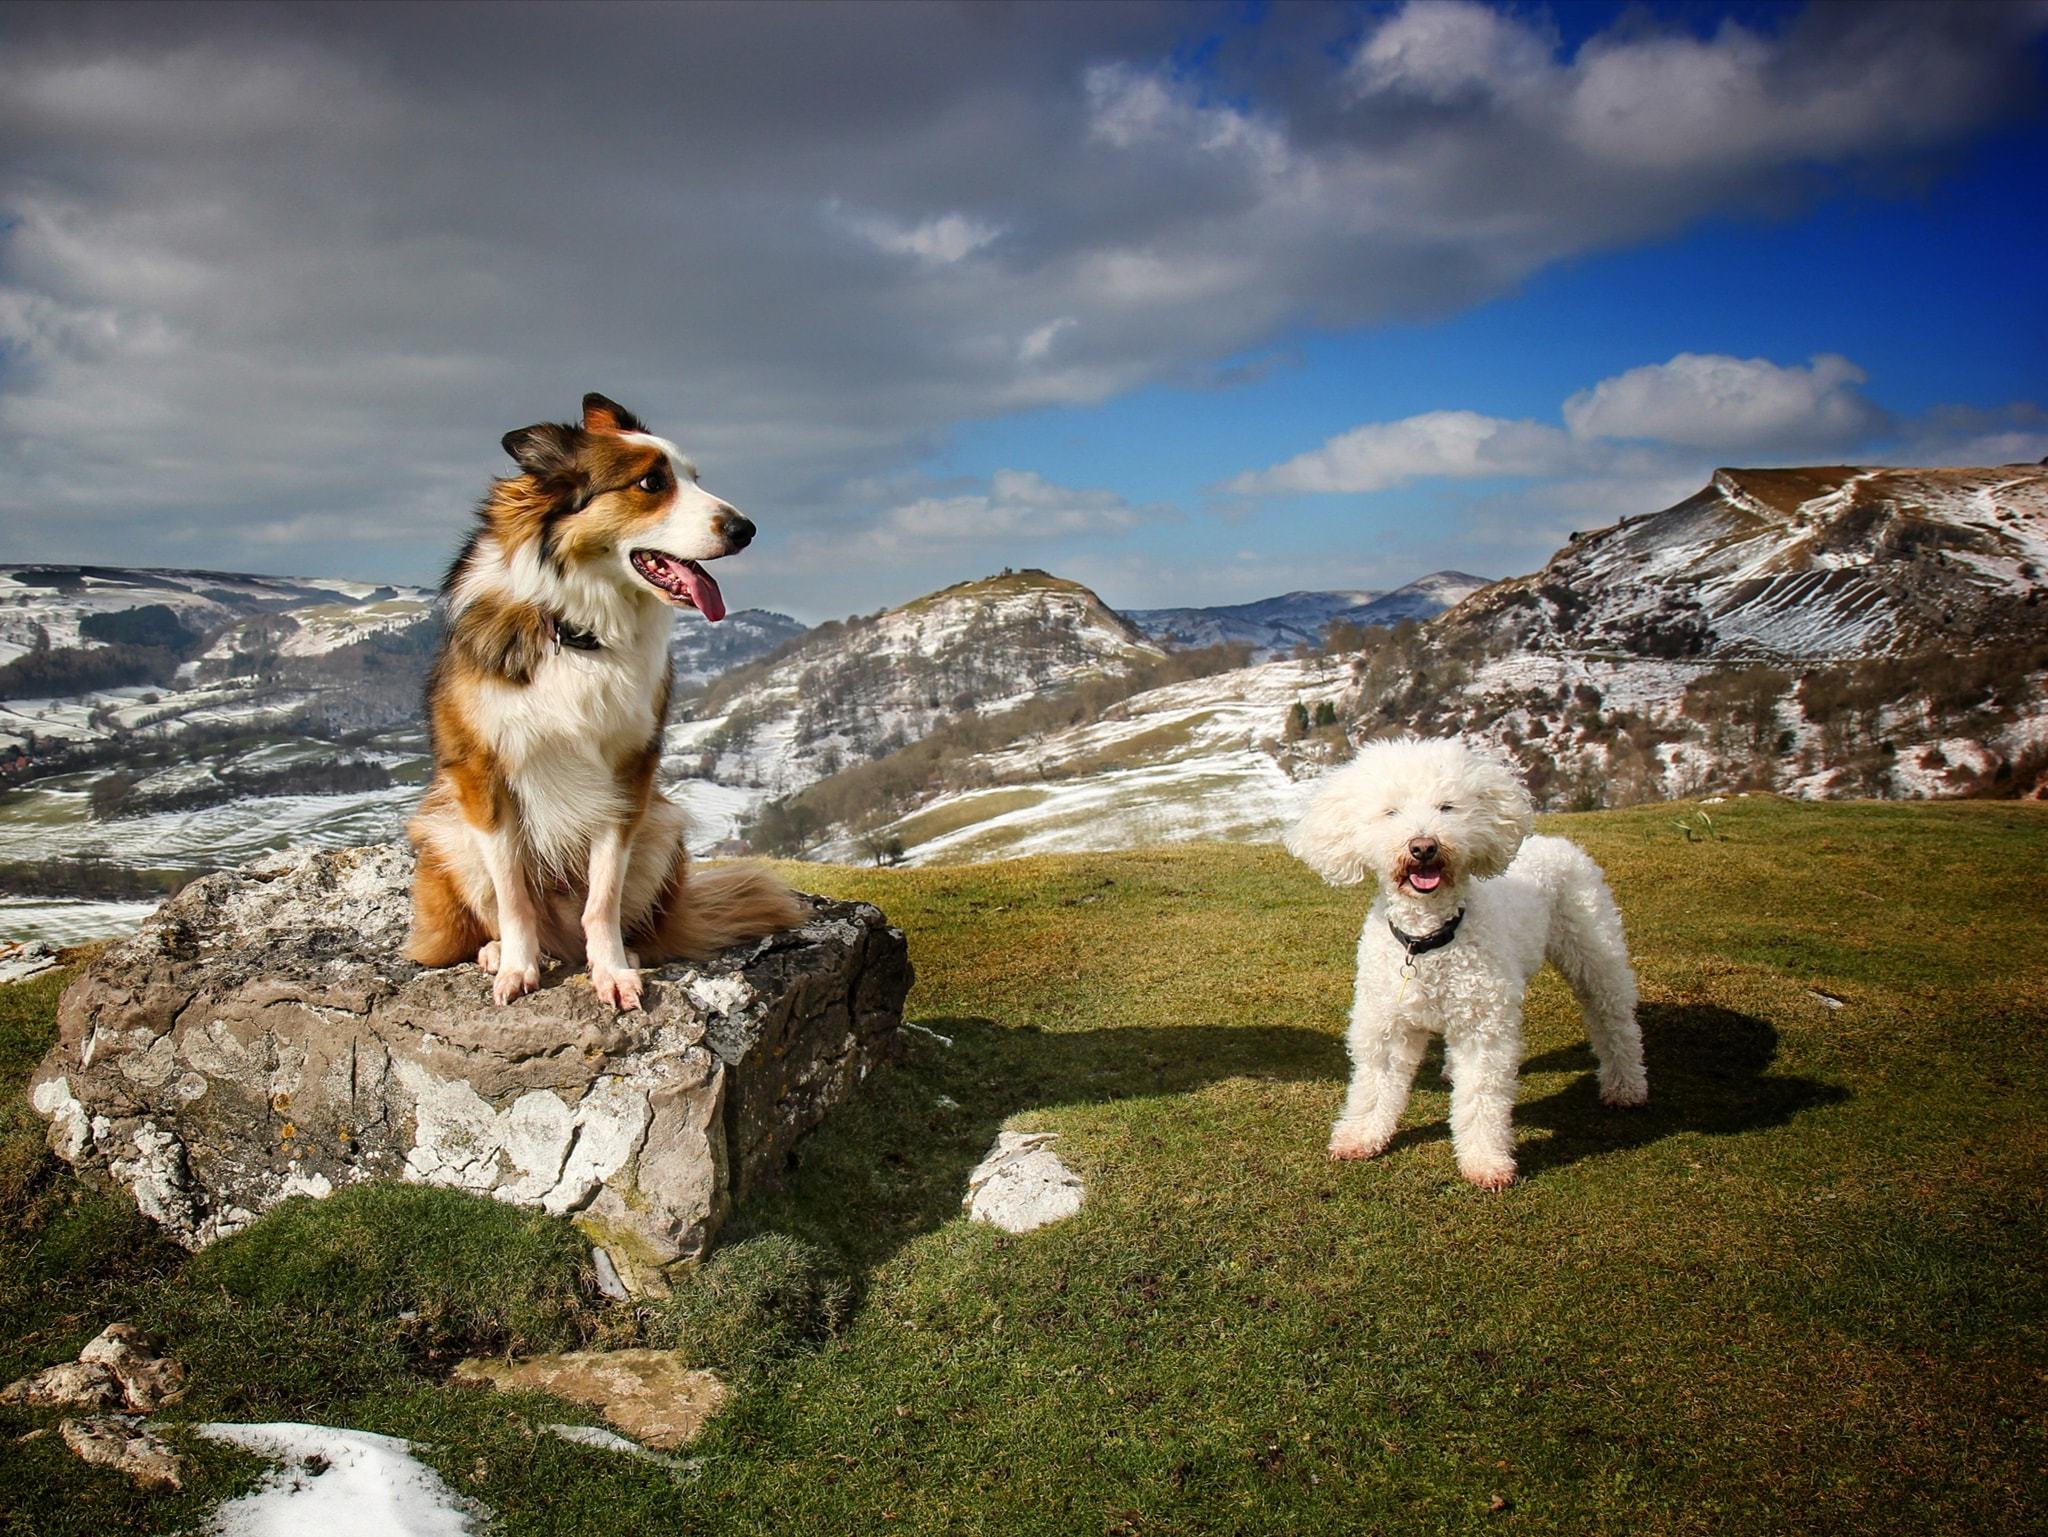 Sean Thompson captures a stunning view of Chase and Buddy at the Llangollen Panorama.